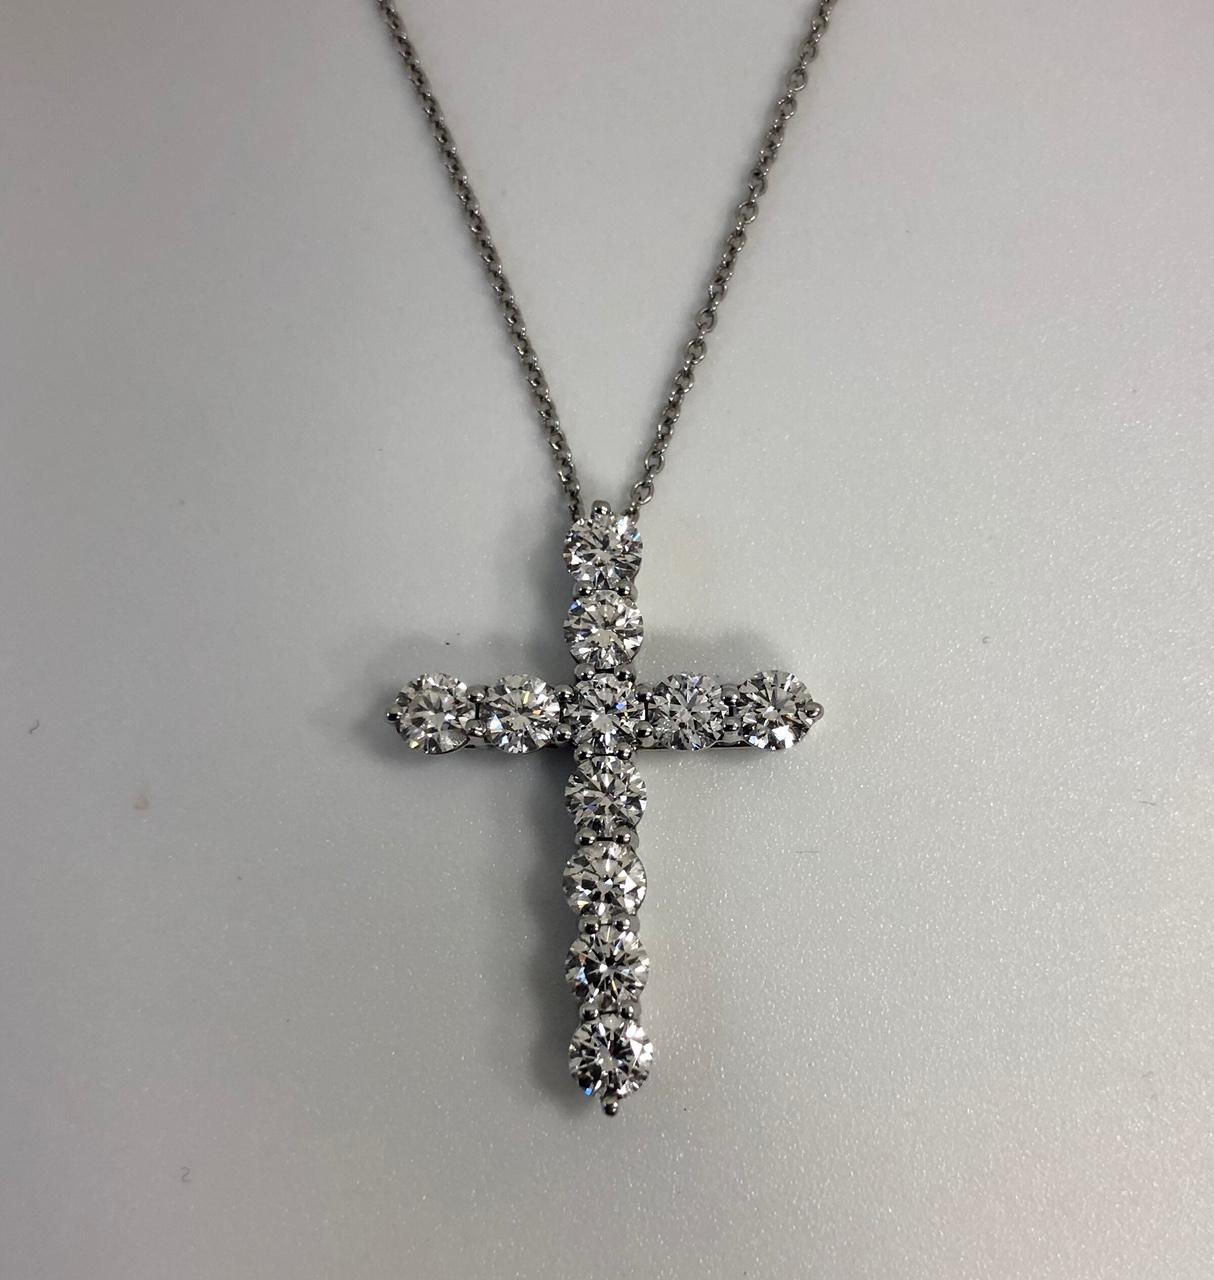 The diamond cross, cruciform pendant, by Tiffany & Co. is crafted in platinum, large size, and suspended from a 16 inch cable link platinum chain. It is shared prong set with 11 Round Brilliant Cut diamonds totaling approximately 2.07 carats, F-G